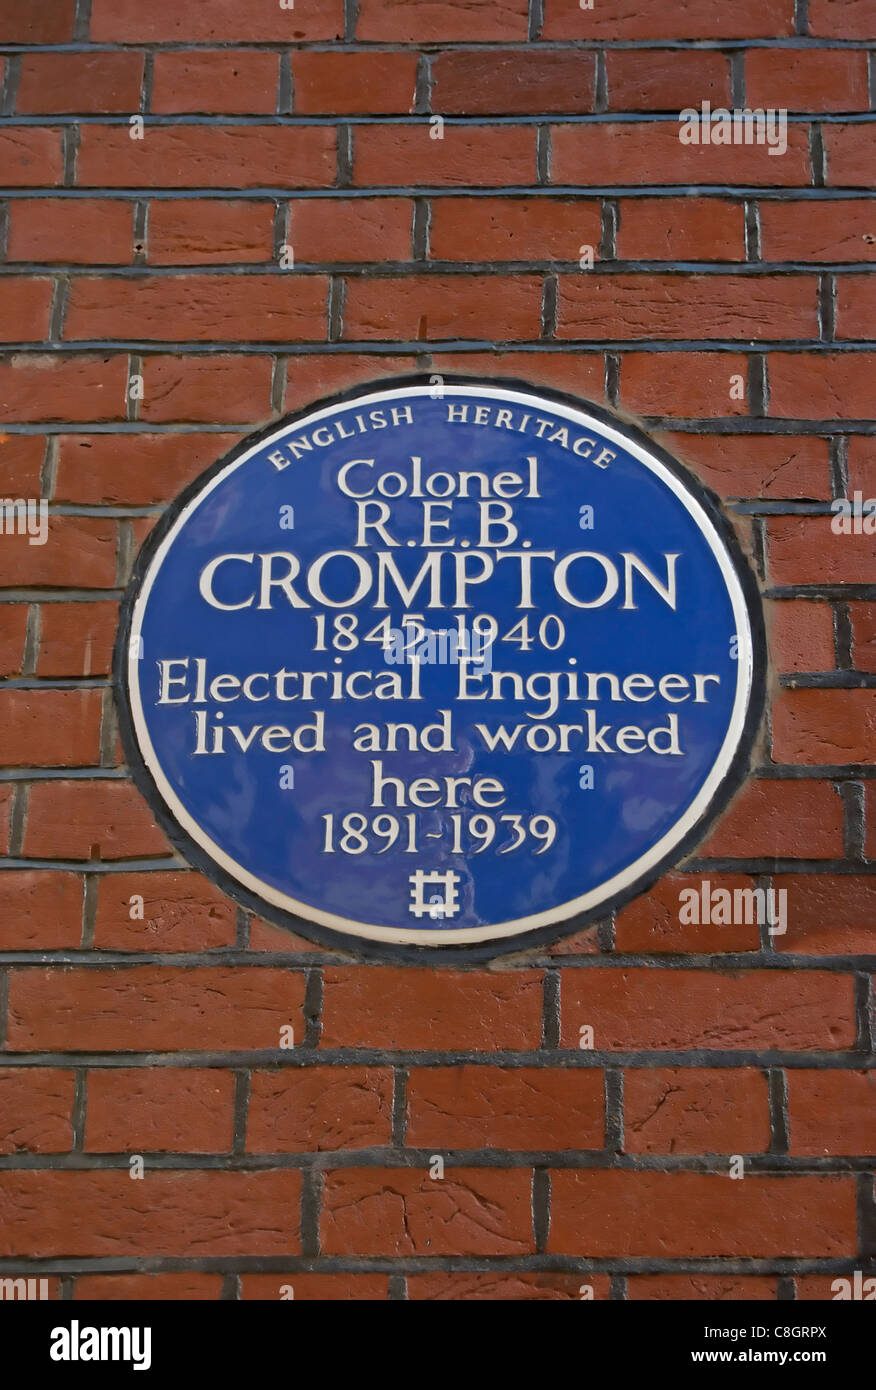 english heritage blue plaque marking a home of electrical engineer colonel r.e.b. crompton, kensington, london, england Stock Photo